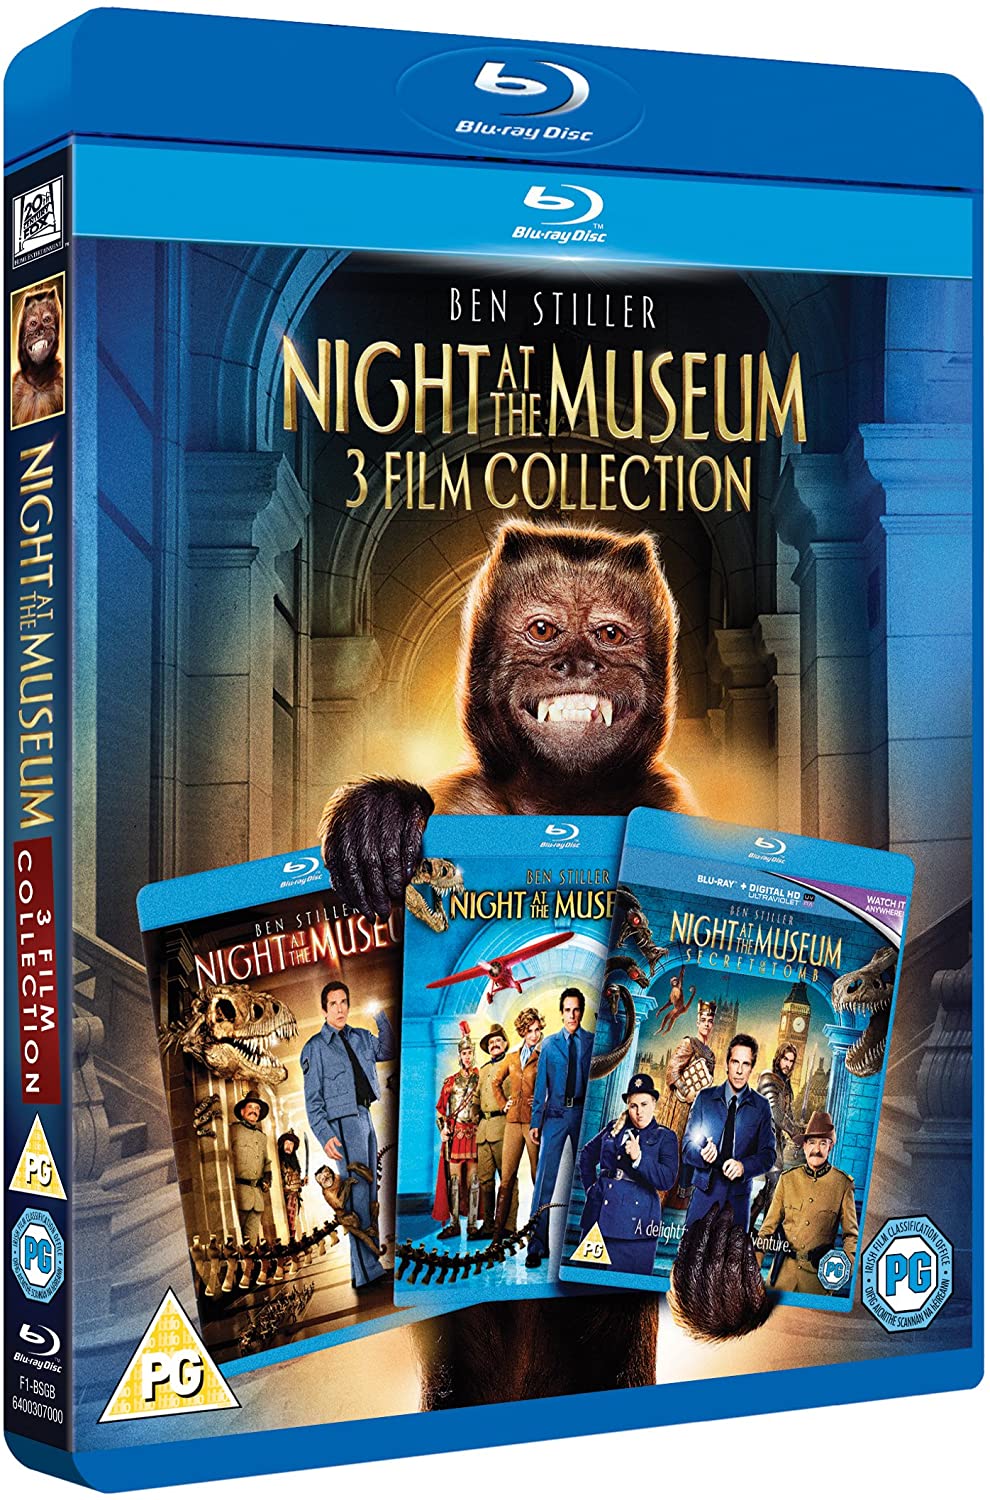 Night At The Museum 1-3 Tripack BD [2006] - Comedy/Adventure [Blu-ray]